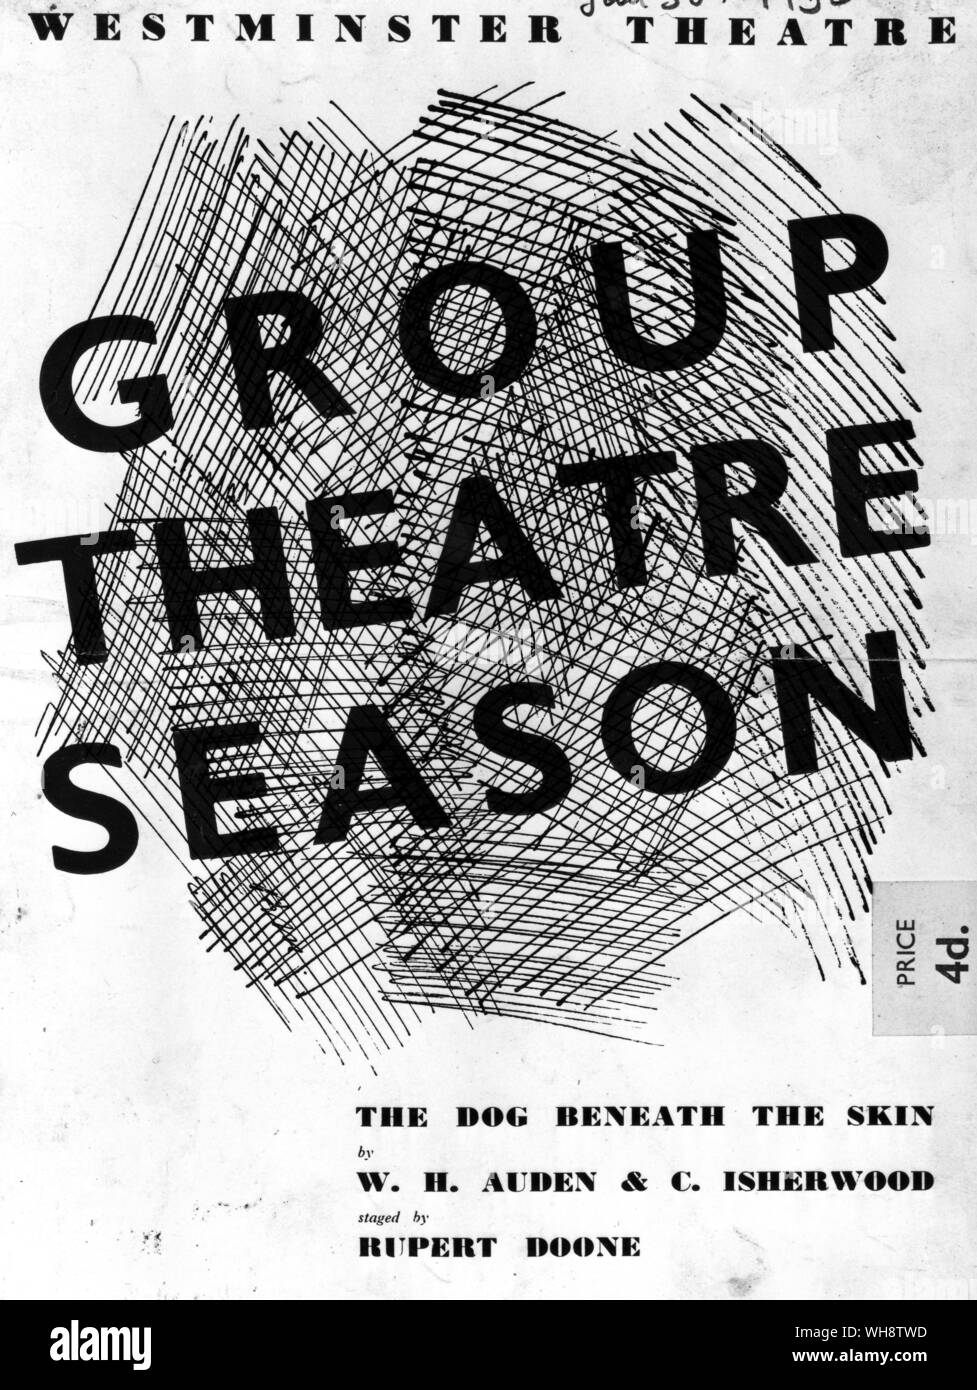 The programme for the production ofThe Dog Beneath The Skin 1936 Stock Photo